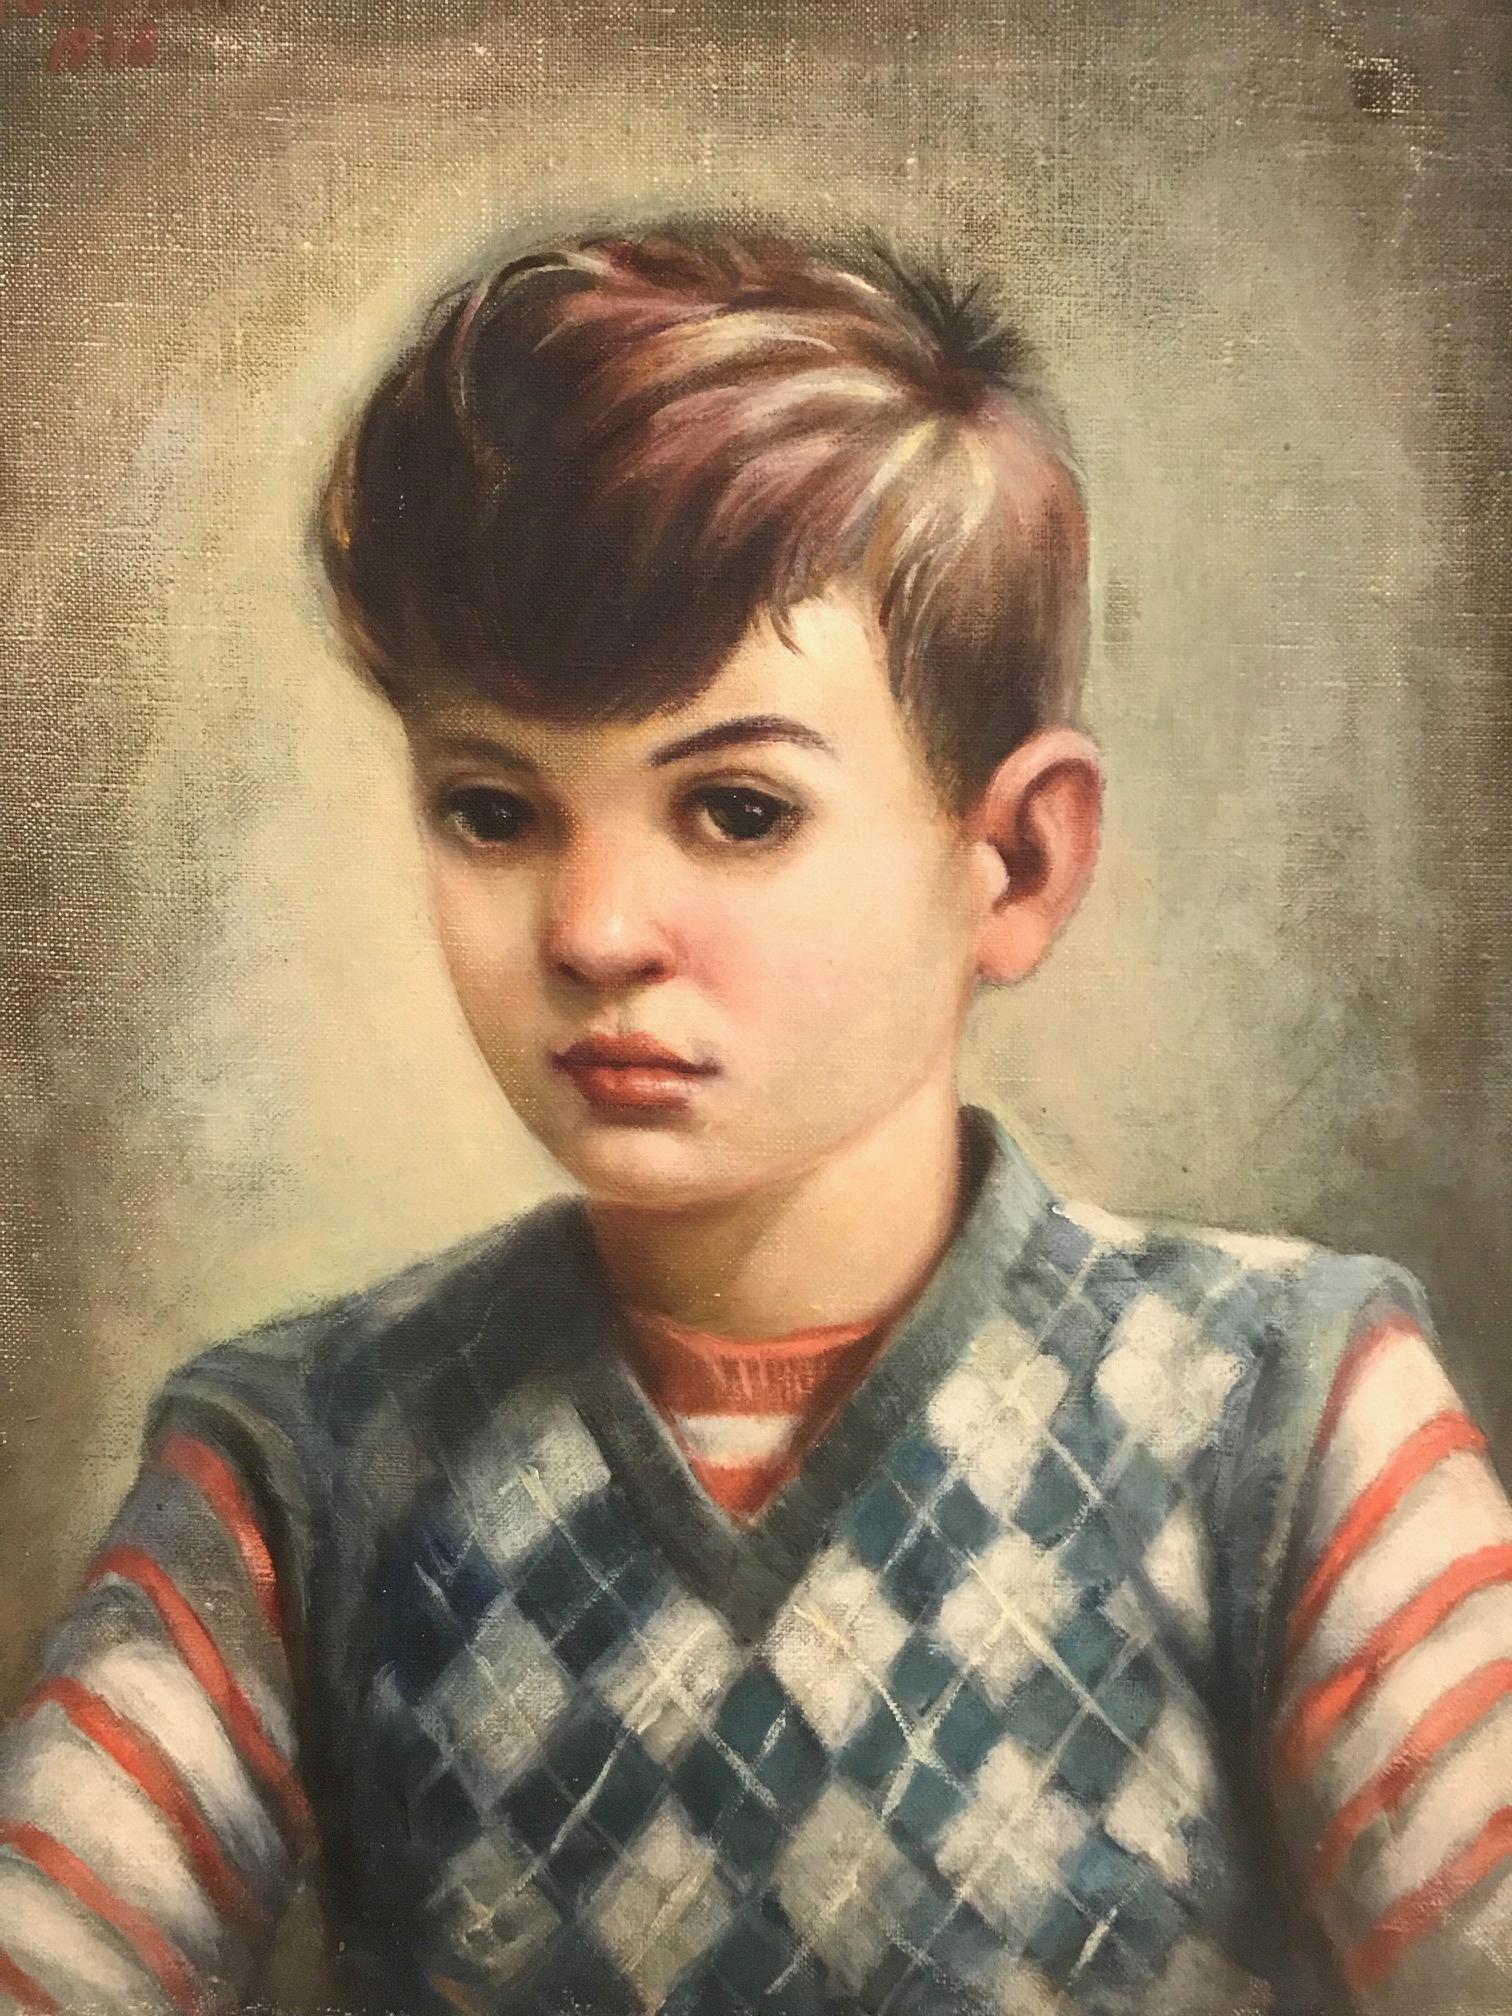 Hand-Crafted Mid-Century Modern Oil Painting, Portrait of Boy by Robert Rukavina, circa 1948